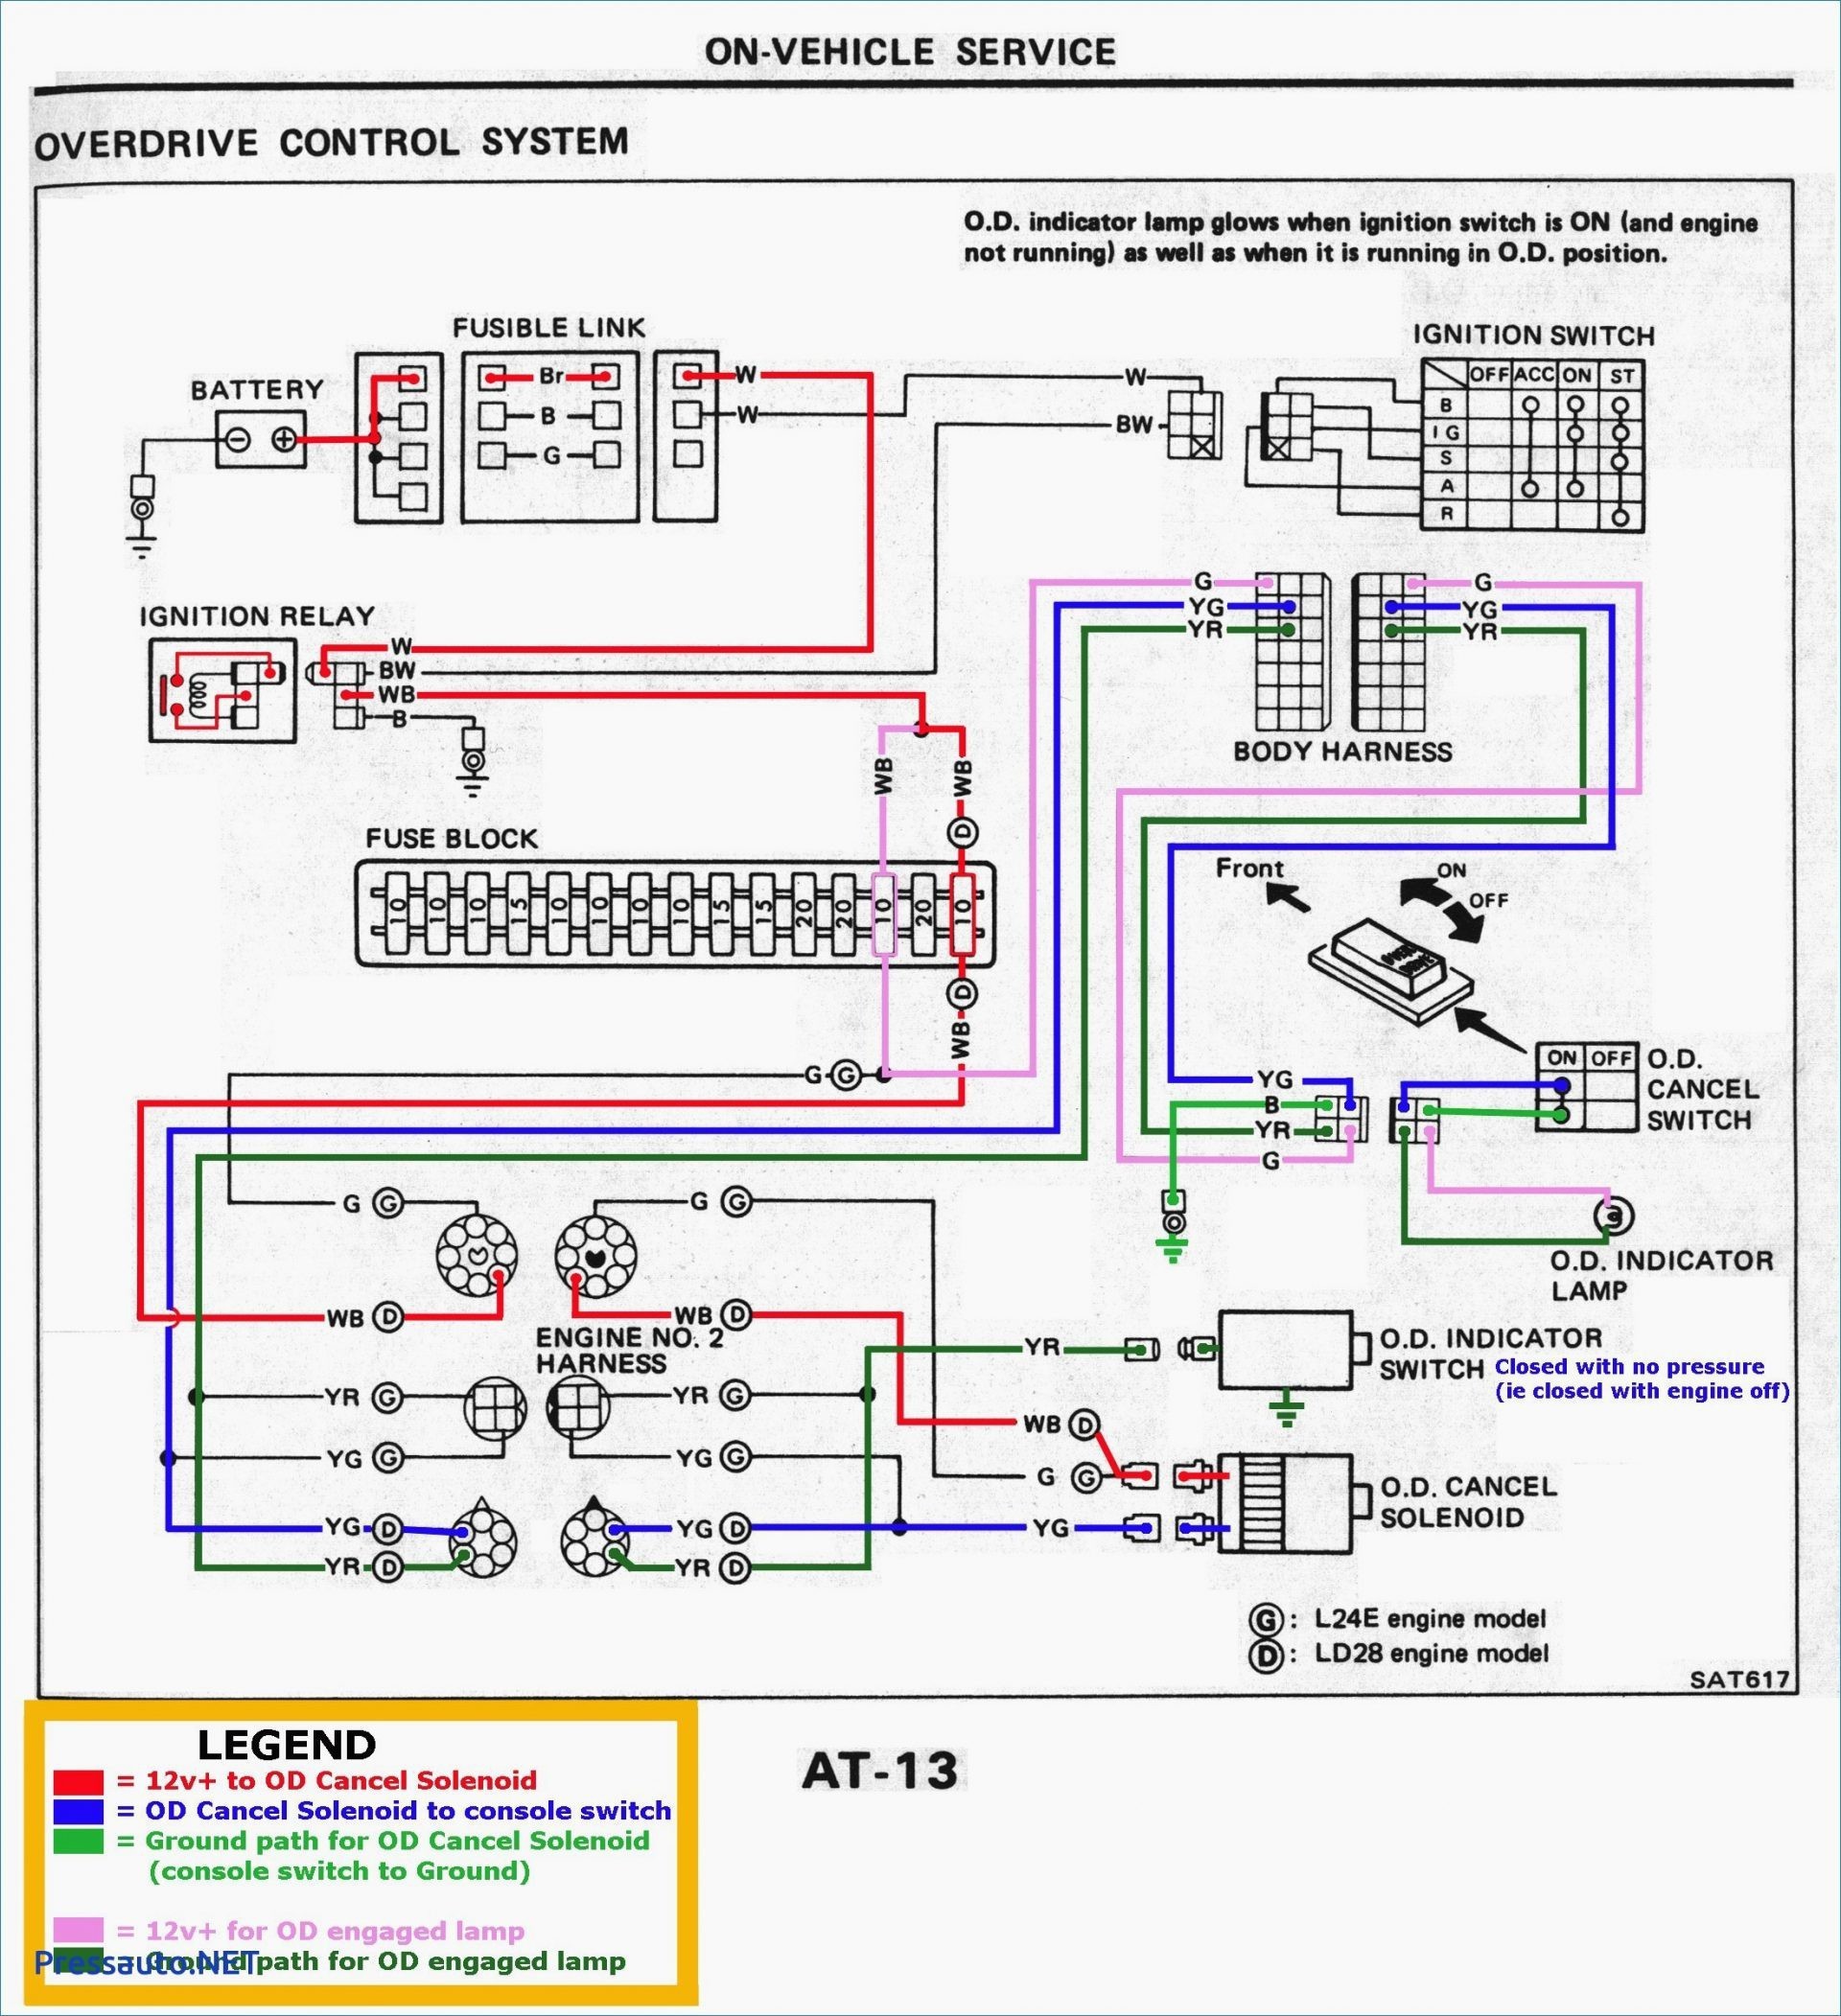 Toyota Corolla Engine Diagram 2002 Prius Engine Diagram Another Blog About Wiring Diagram • Of Toyota Corolla Engine Diagram